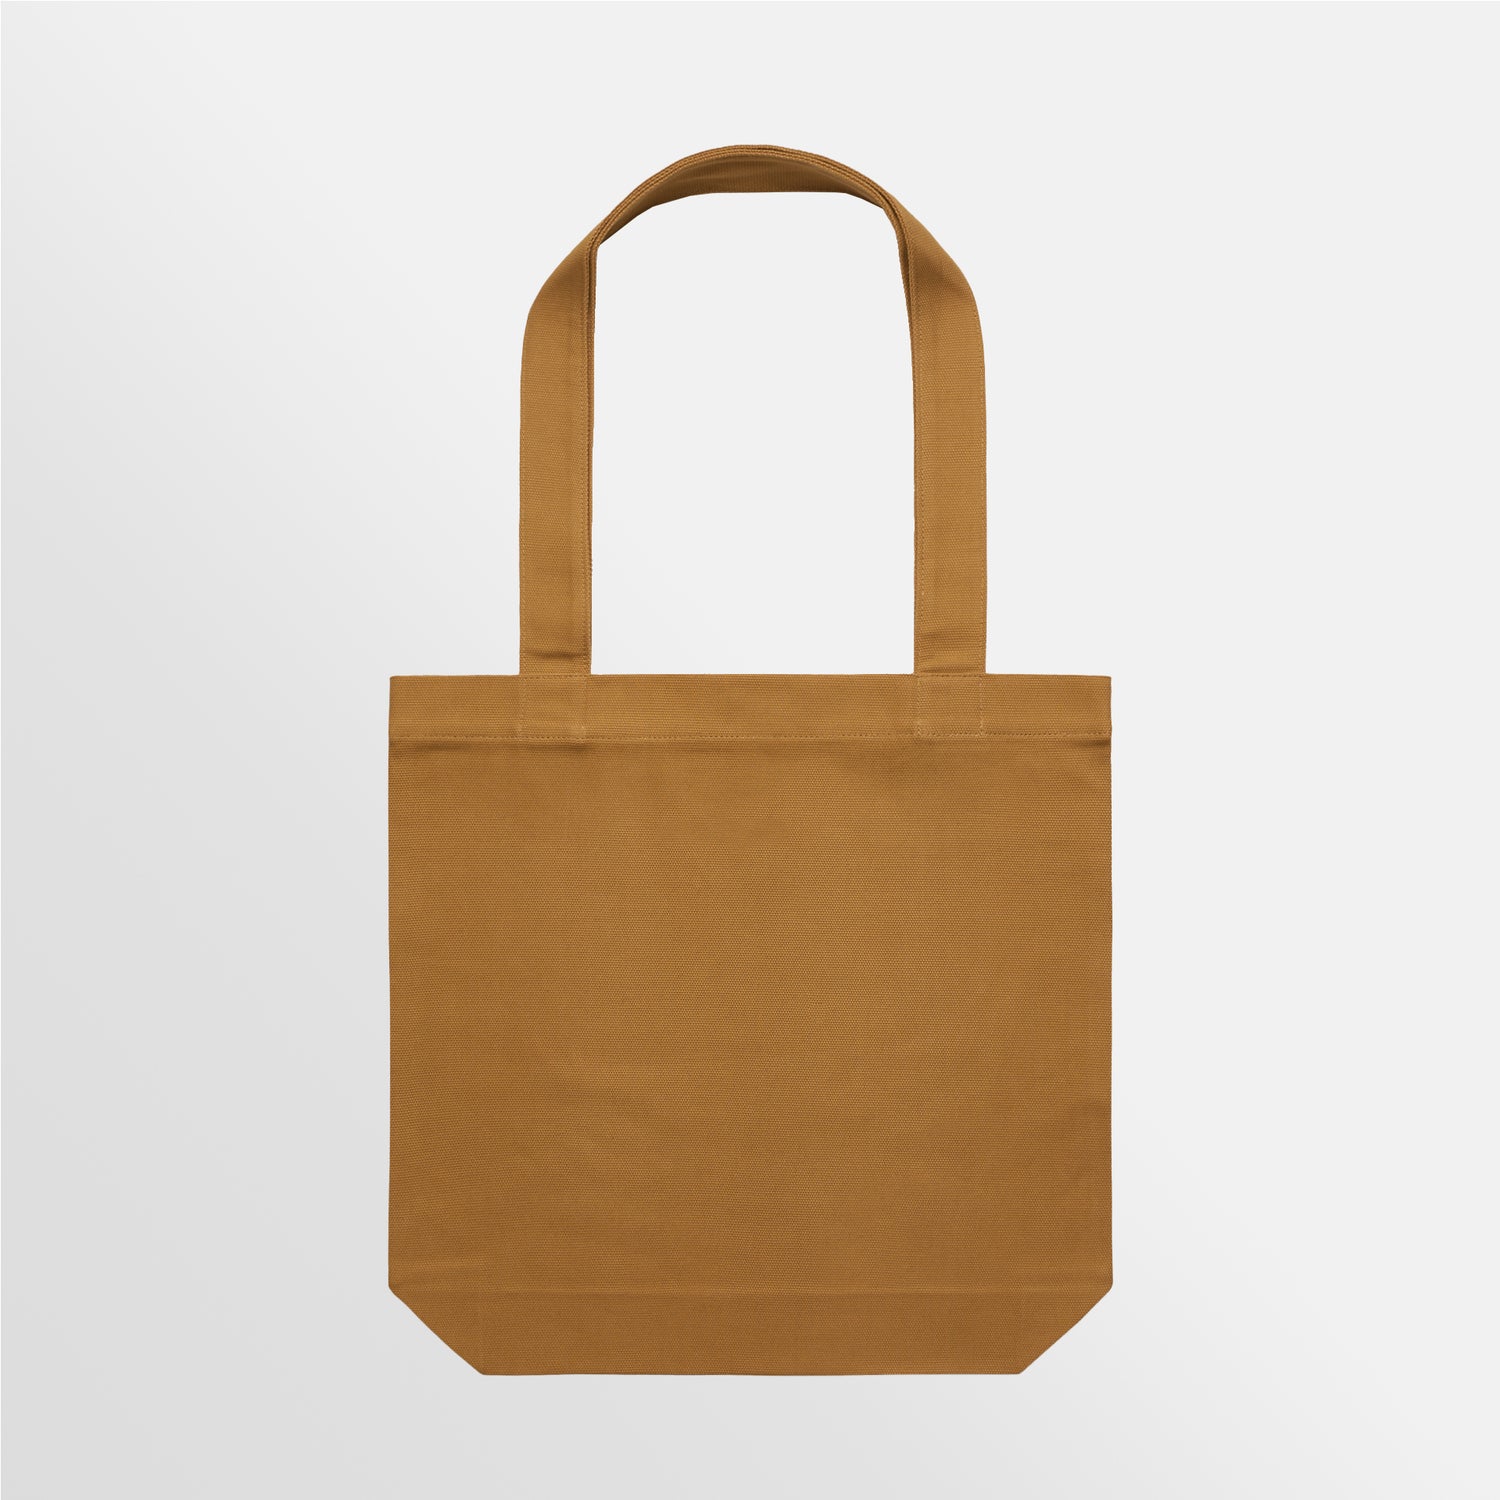 Carrie Tote - On Request